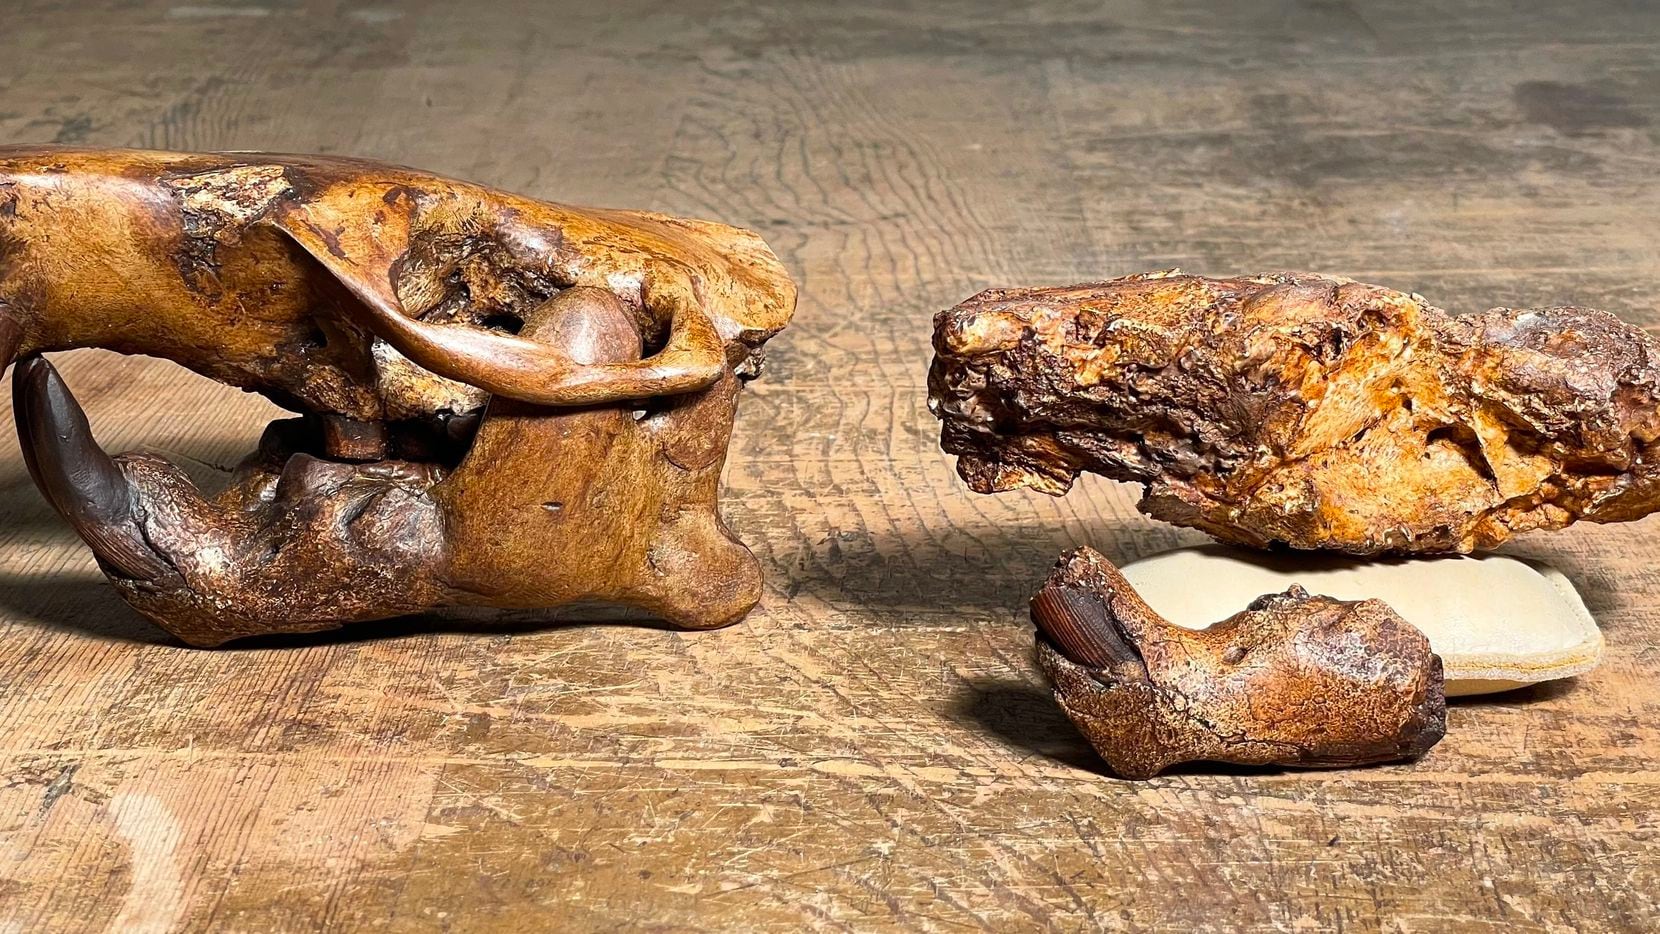 A partial skull fossil from the ancient beaver Anchitheriomys buceei (on right) alongside a...